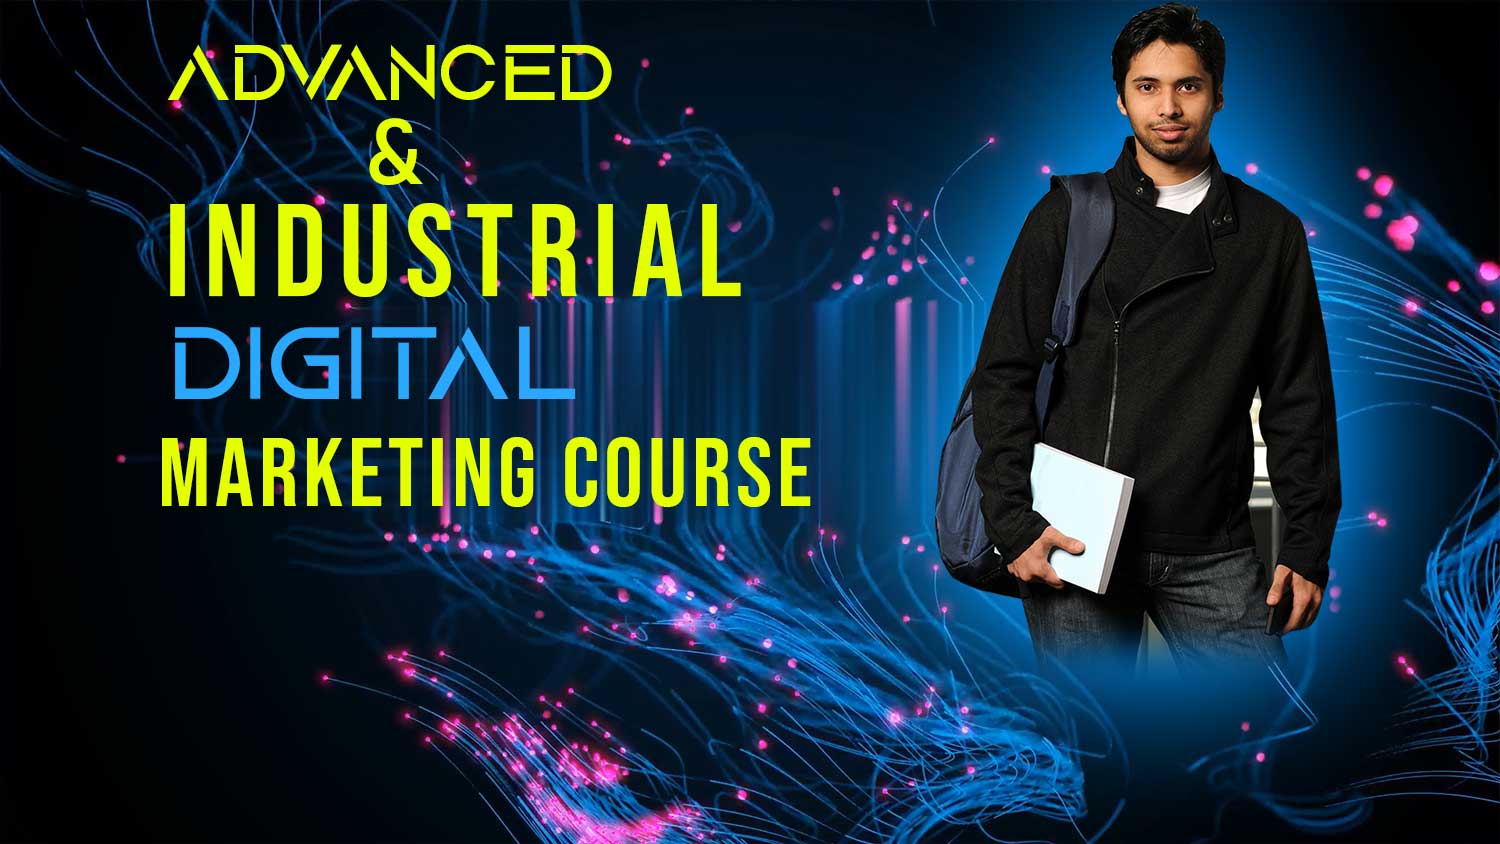 Advance and Industrial Digital Marketing Course in Kolkata